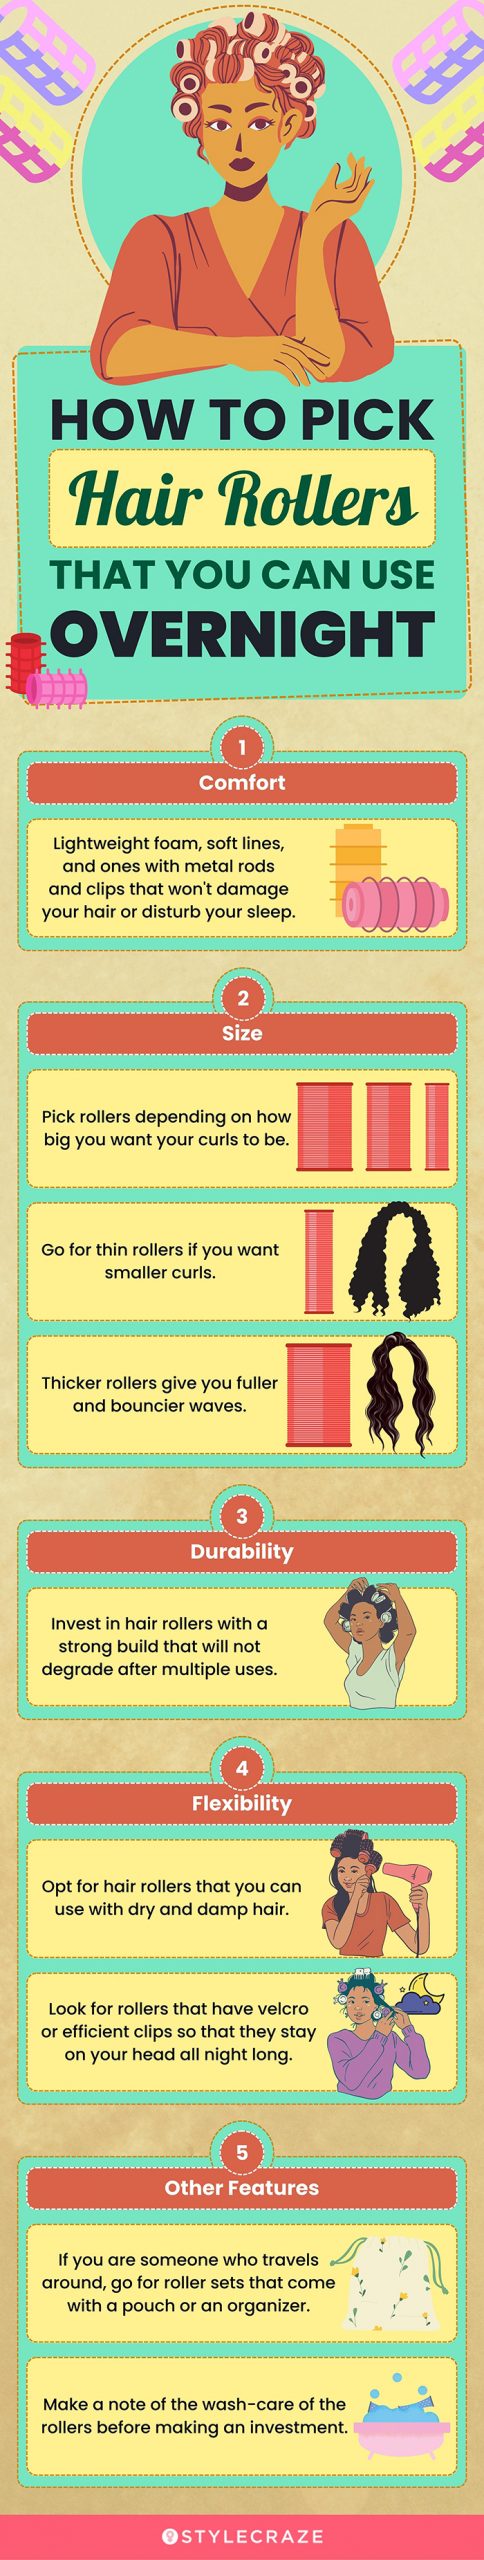 How To Pick Hair Rollers That You Can Use Overnight [infographic]